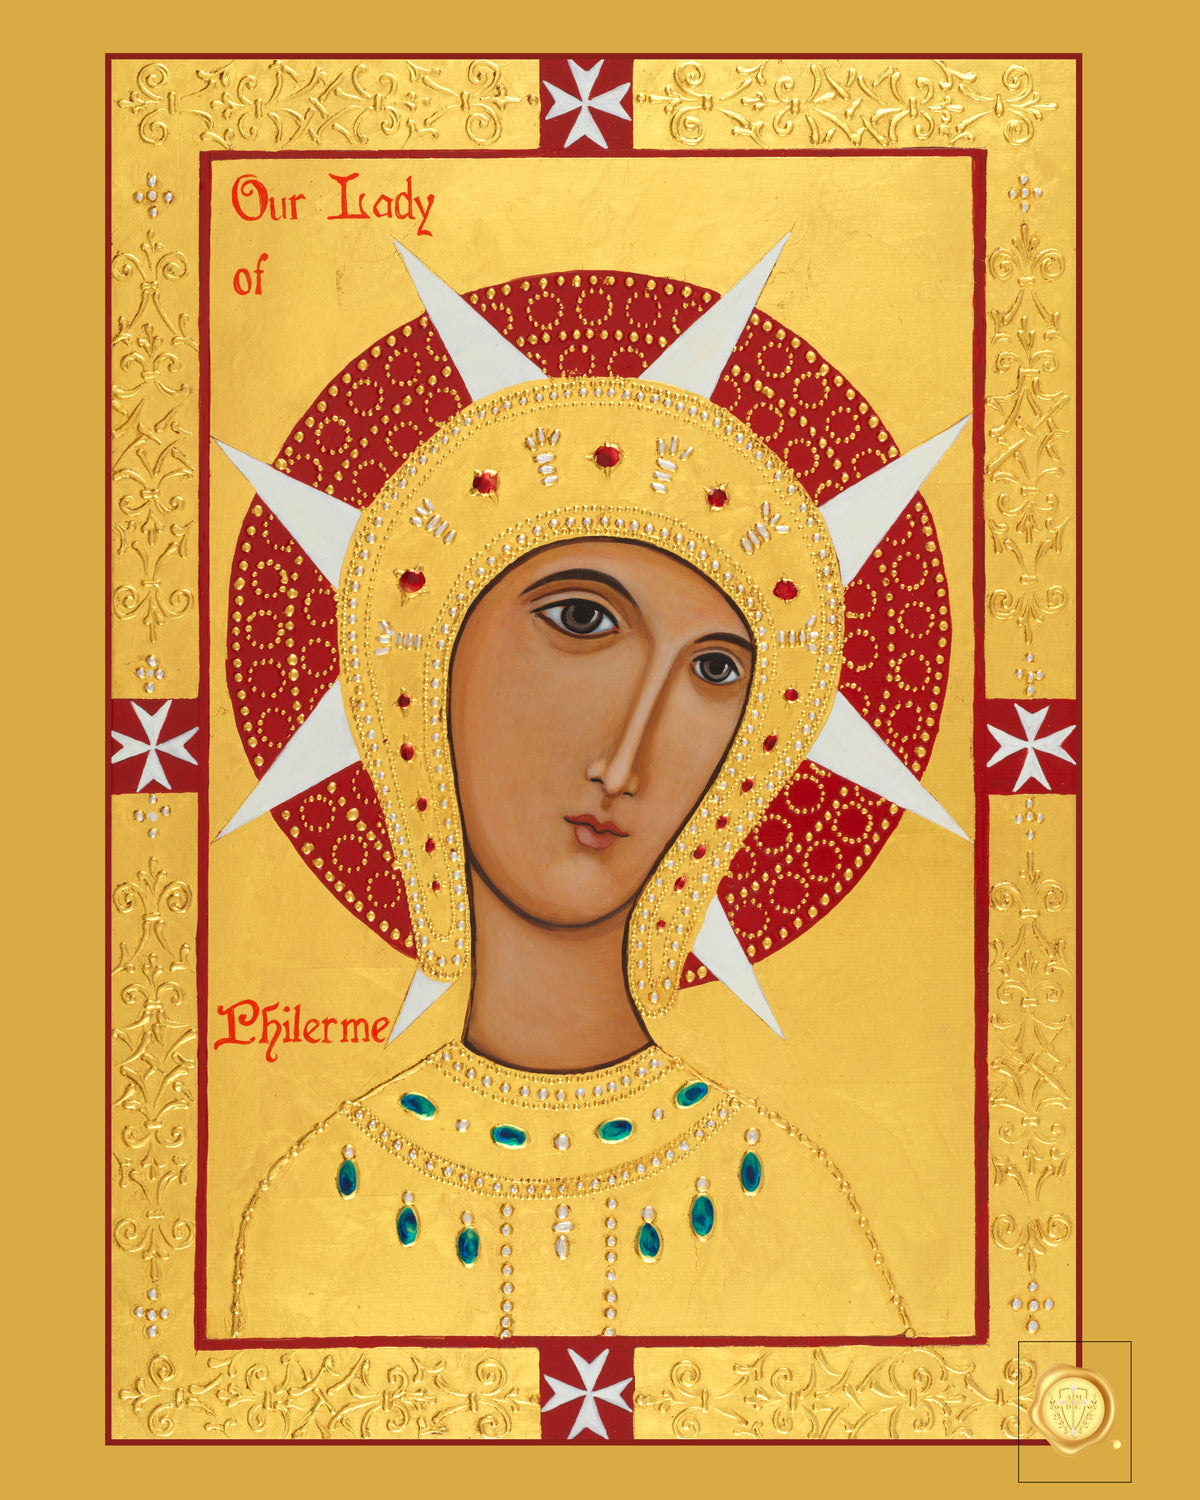 Our Lady of Philerme